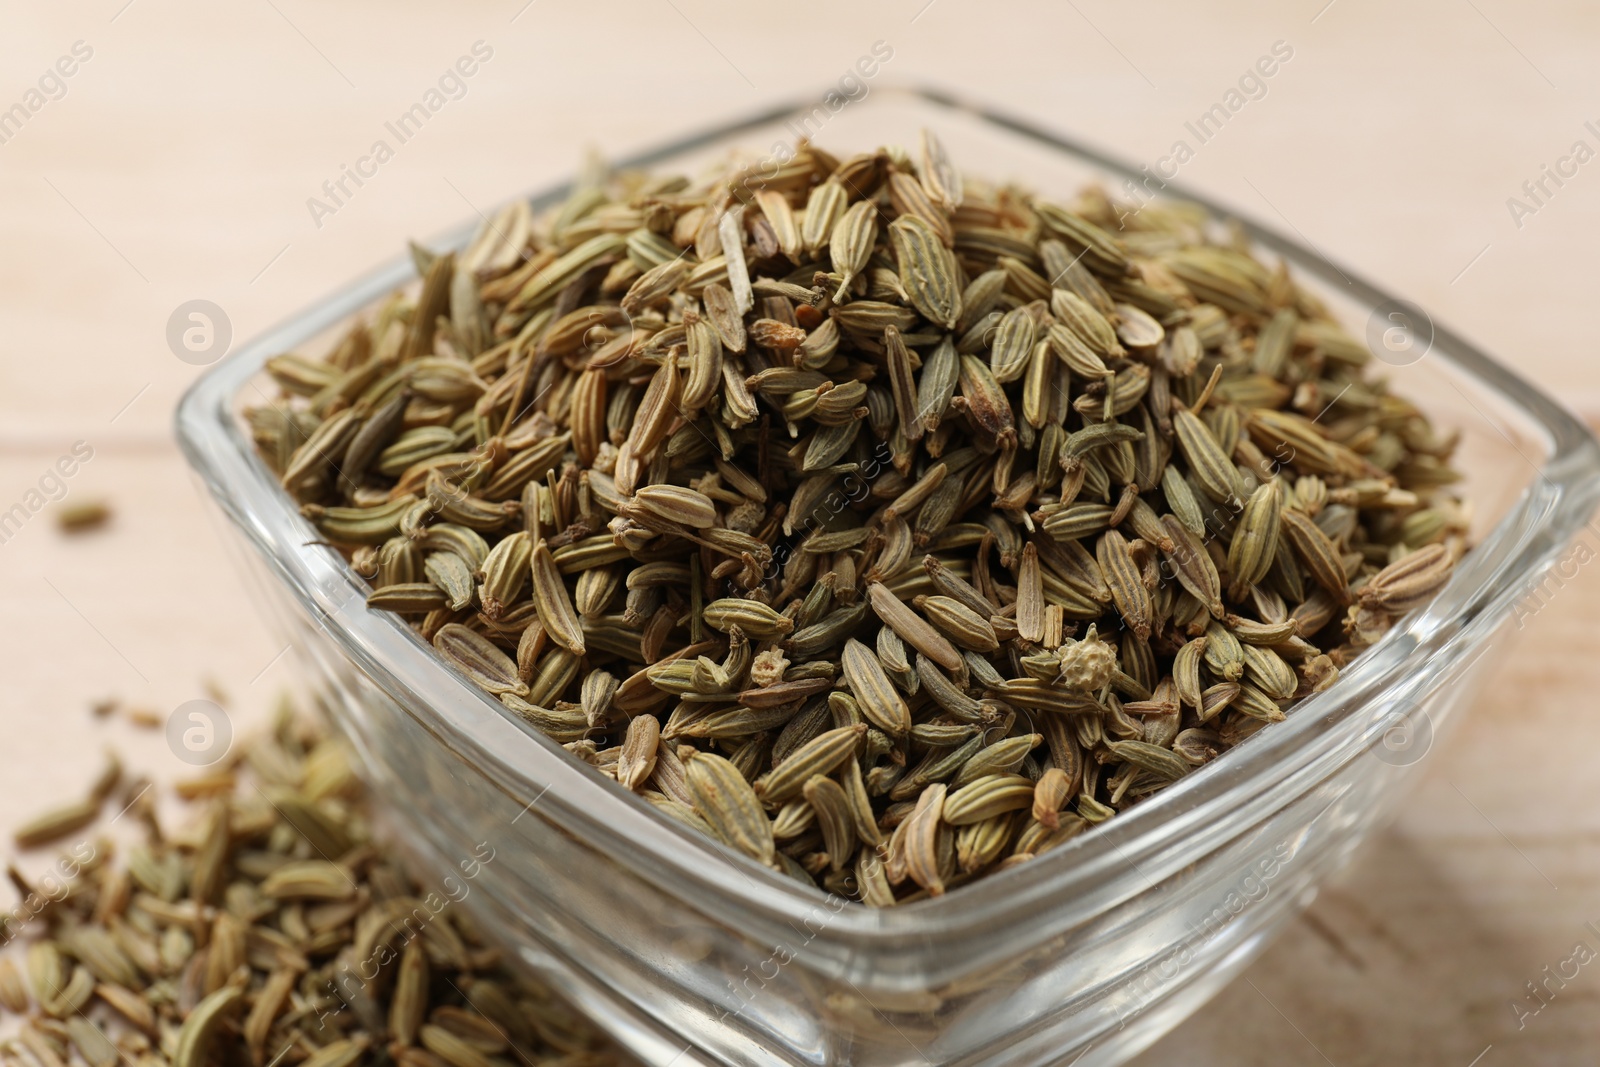 Photo of Fennel seeds in glass bowl on table, closeup